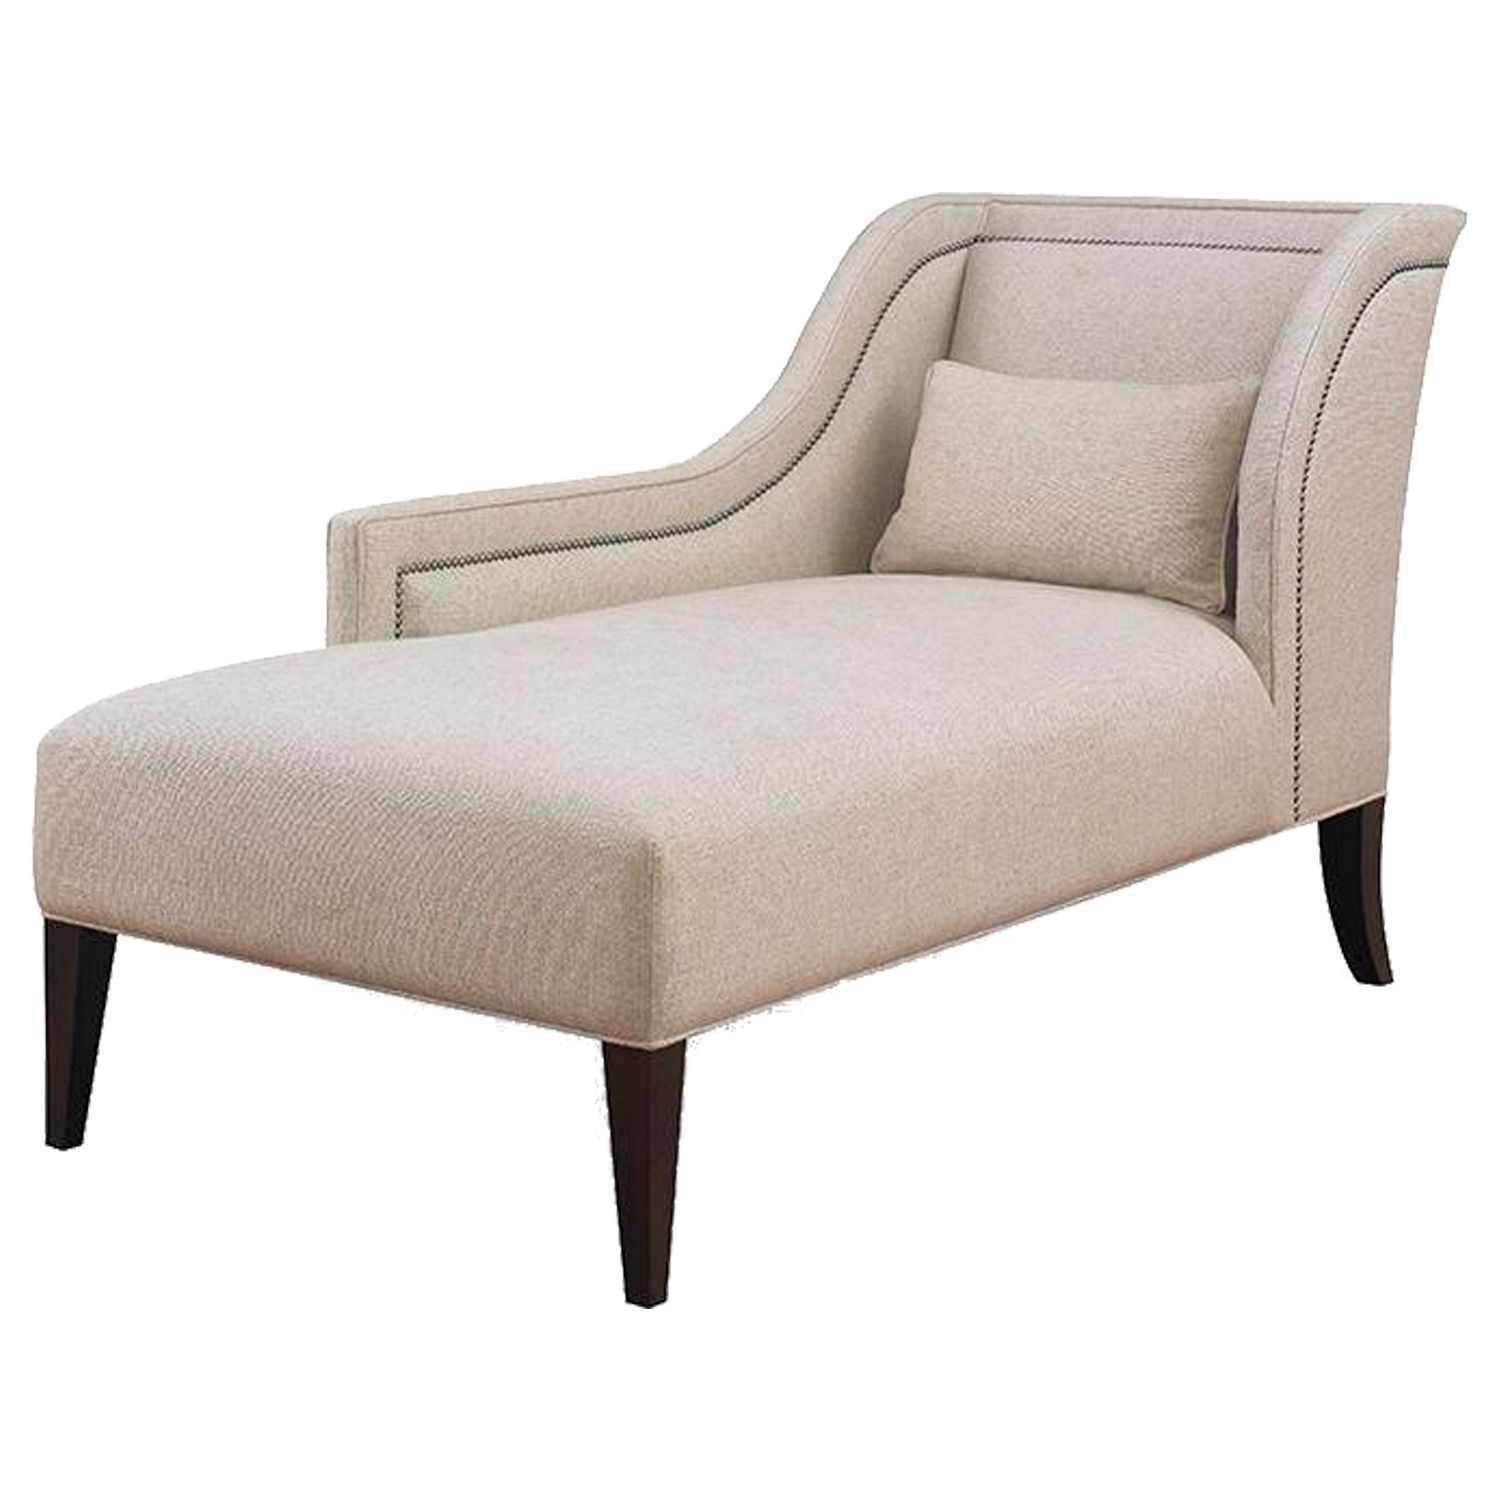 Well Known Upholstered Chaise Lounge Chairs In Buy Pasadena One Arm Chaisekravet – Made To Order Designer (View 3 of 15)